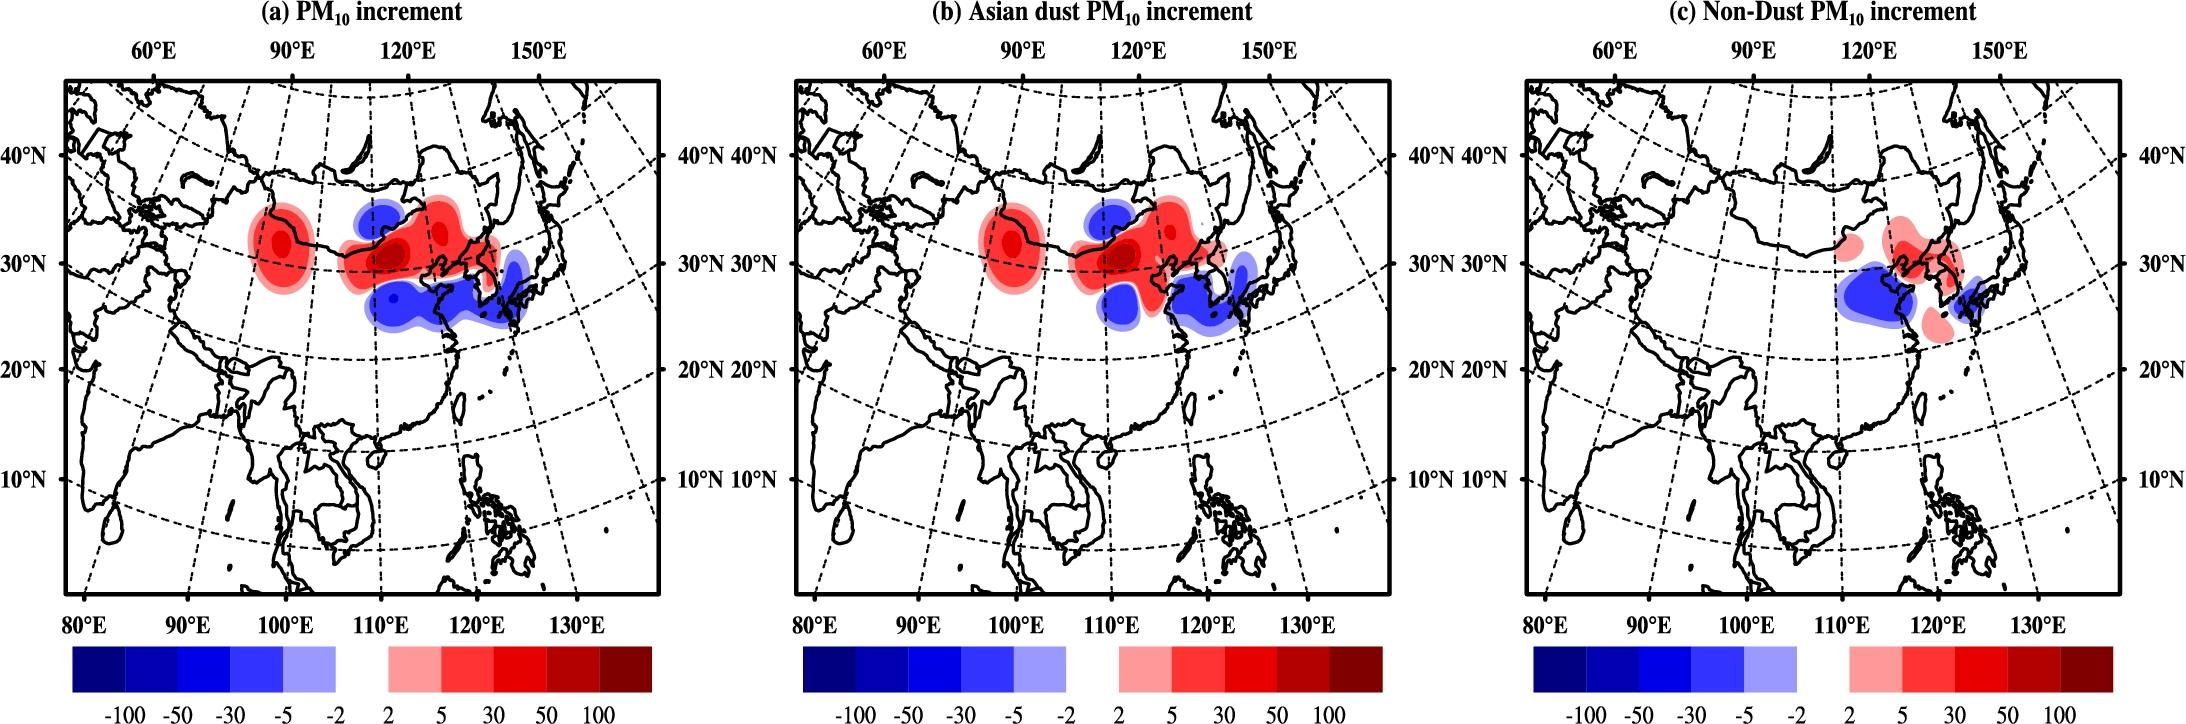 Fig. 3.2.21 The annual mean increment of (a) PM10, (b) Asian dust PM10, and (c) Non-dust PM10 concentration (μg m-3) in the lowest model layer in 2010 after using 2DOI